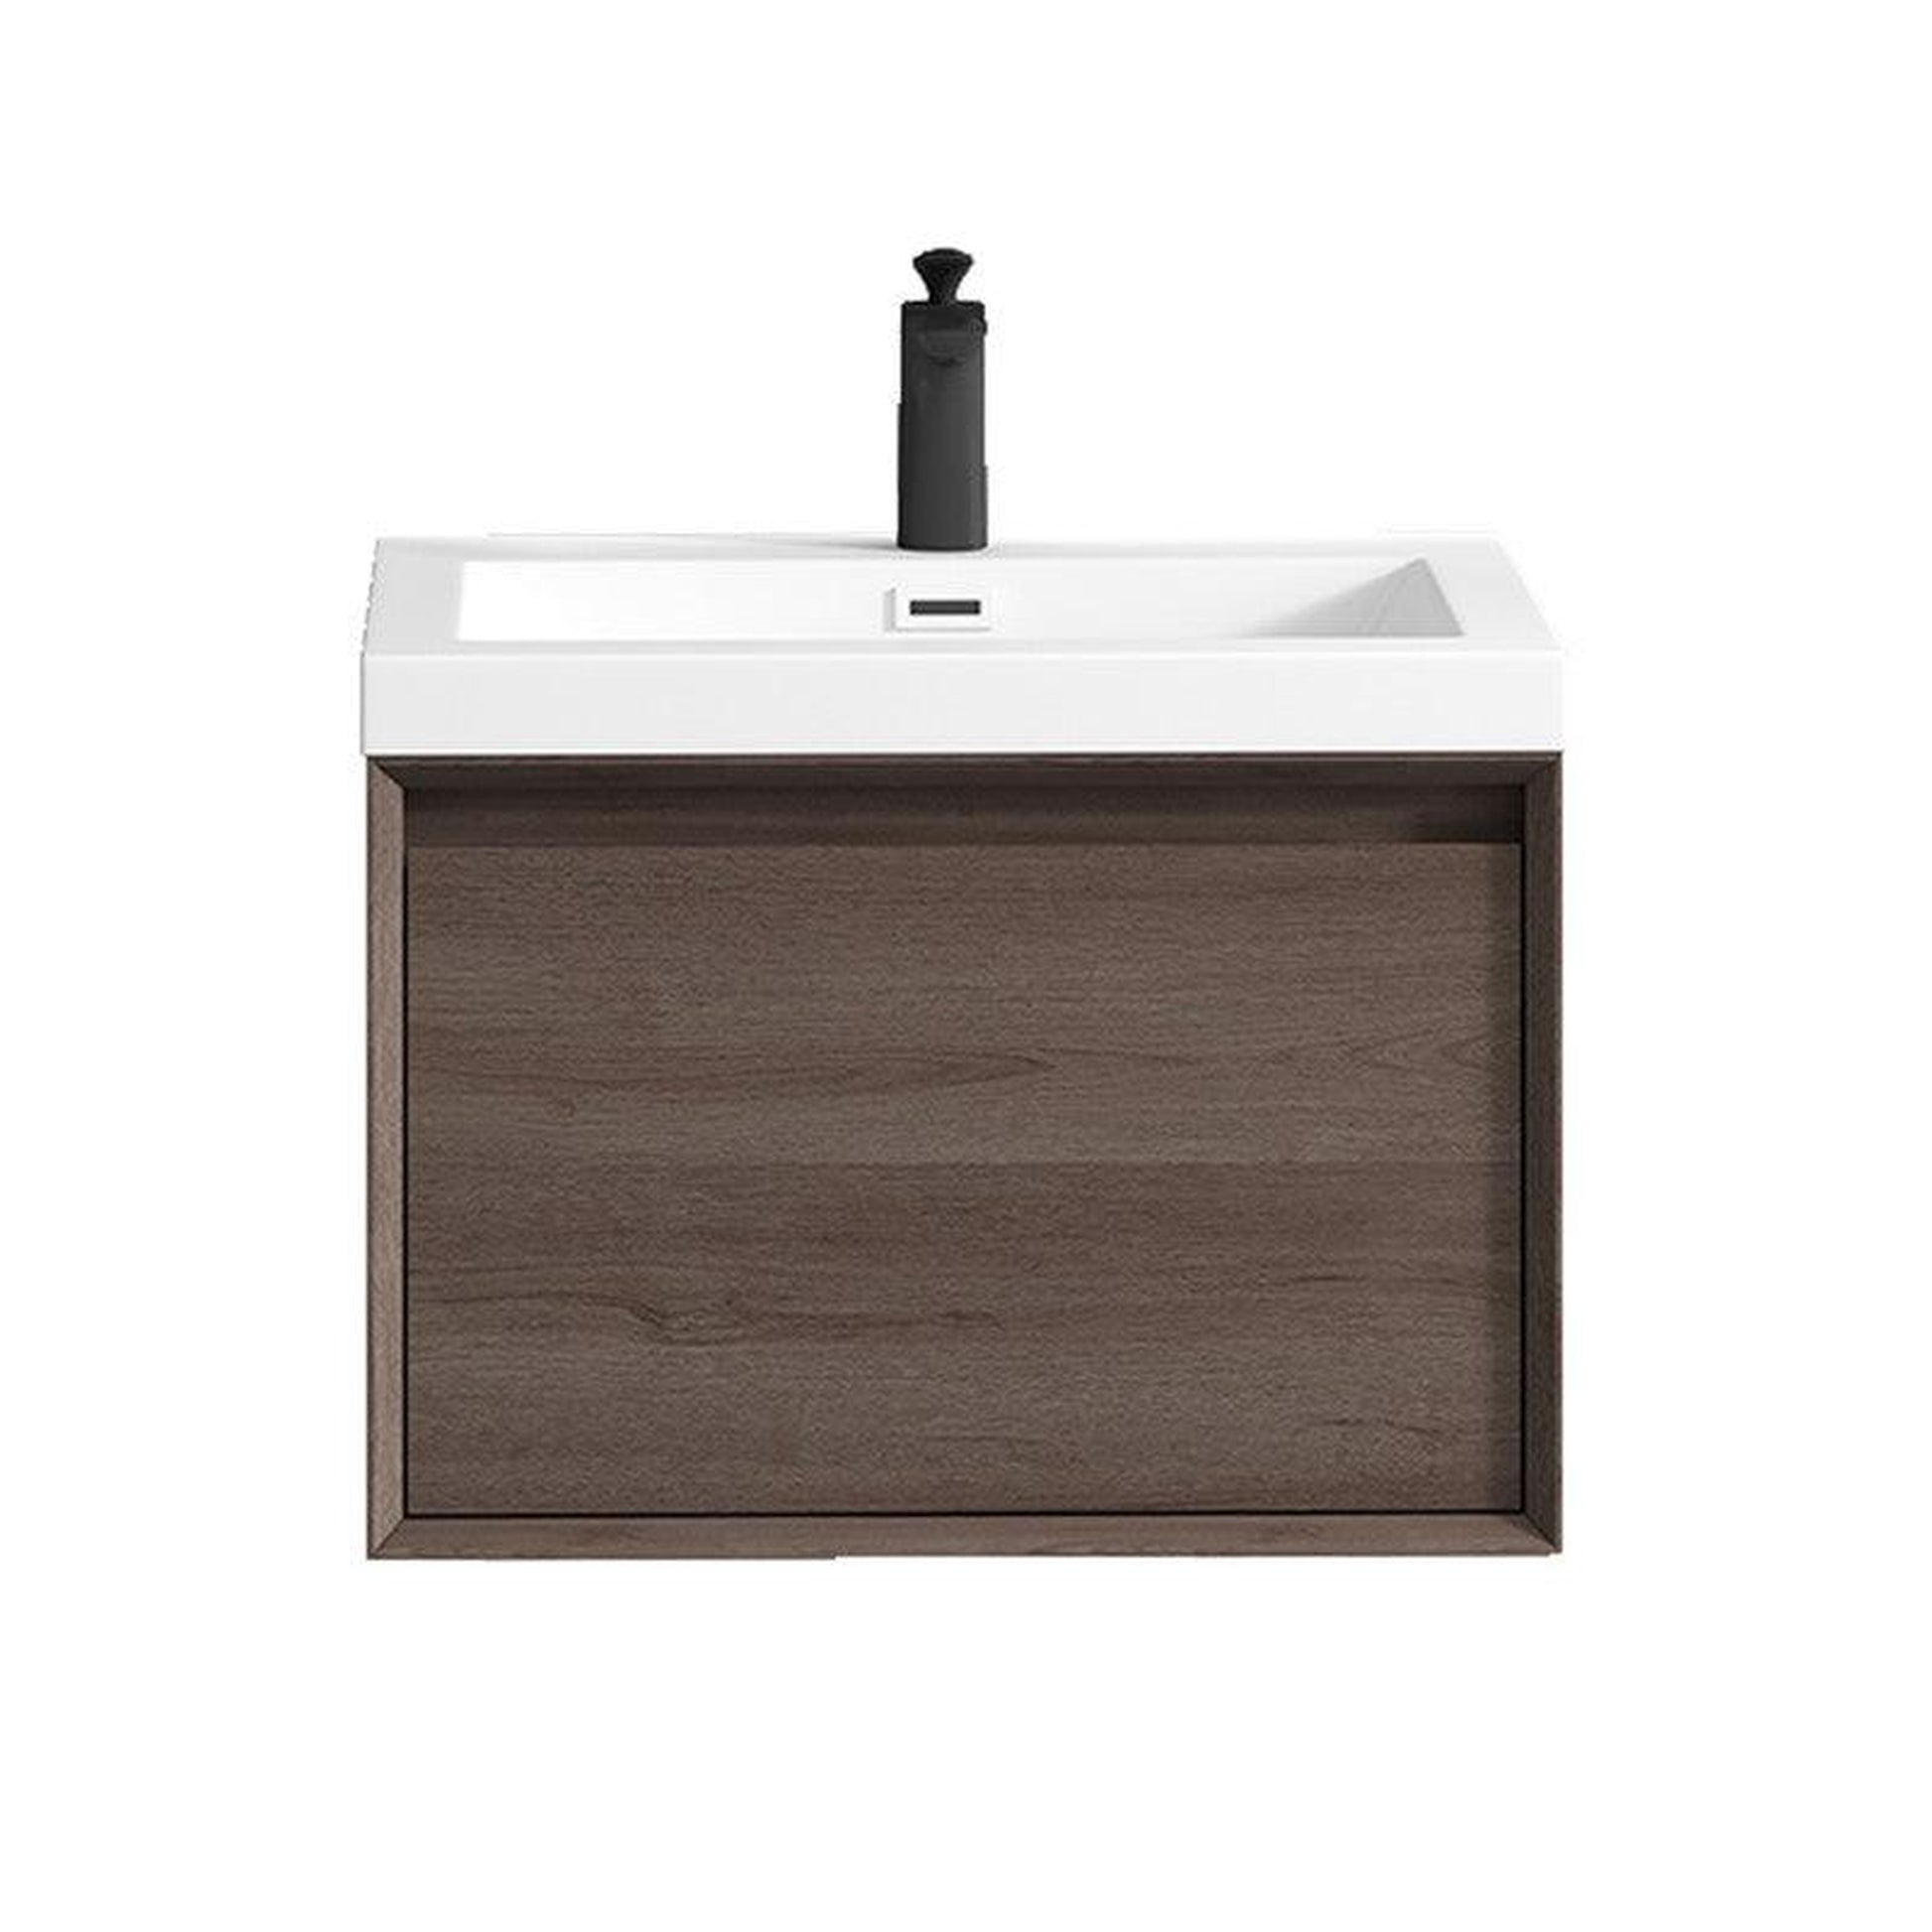 Moreno Bath BELLA 24" Red Oak Wall-Mounted Vanity With Single Reinforced White Acrylic Sink